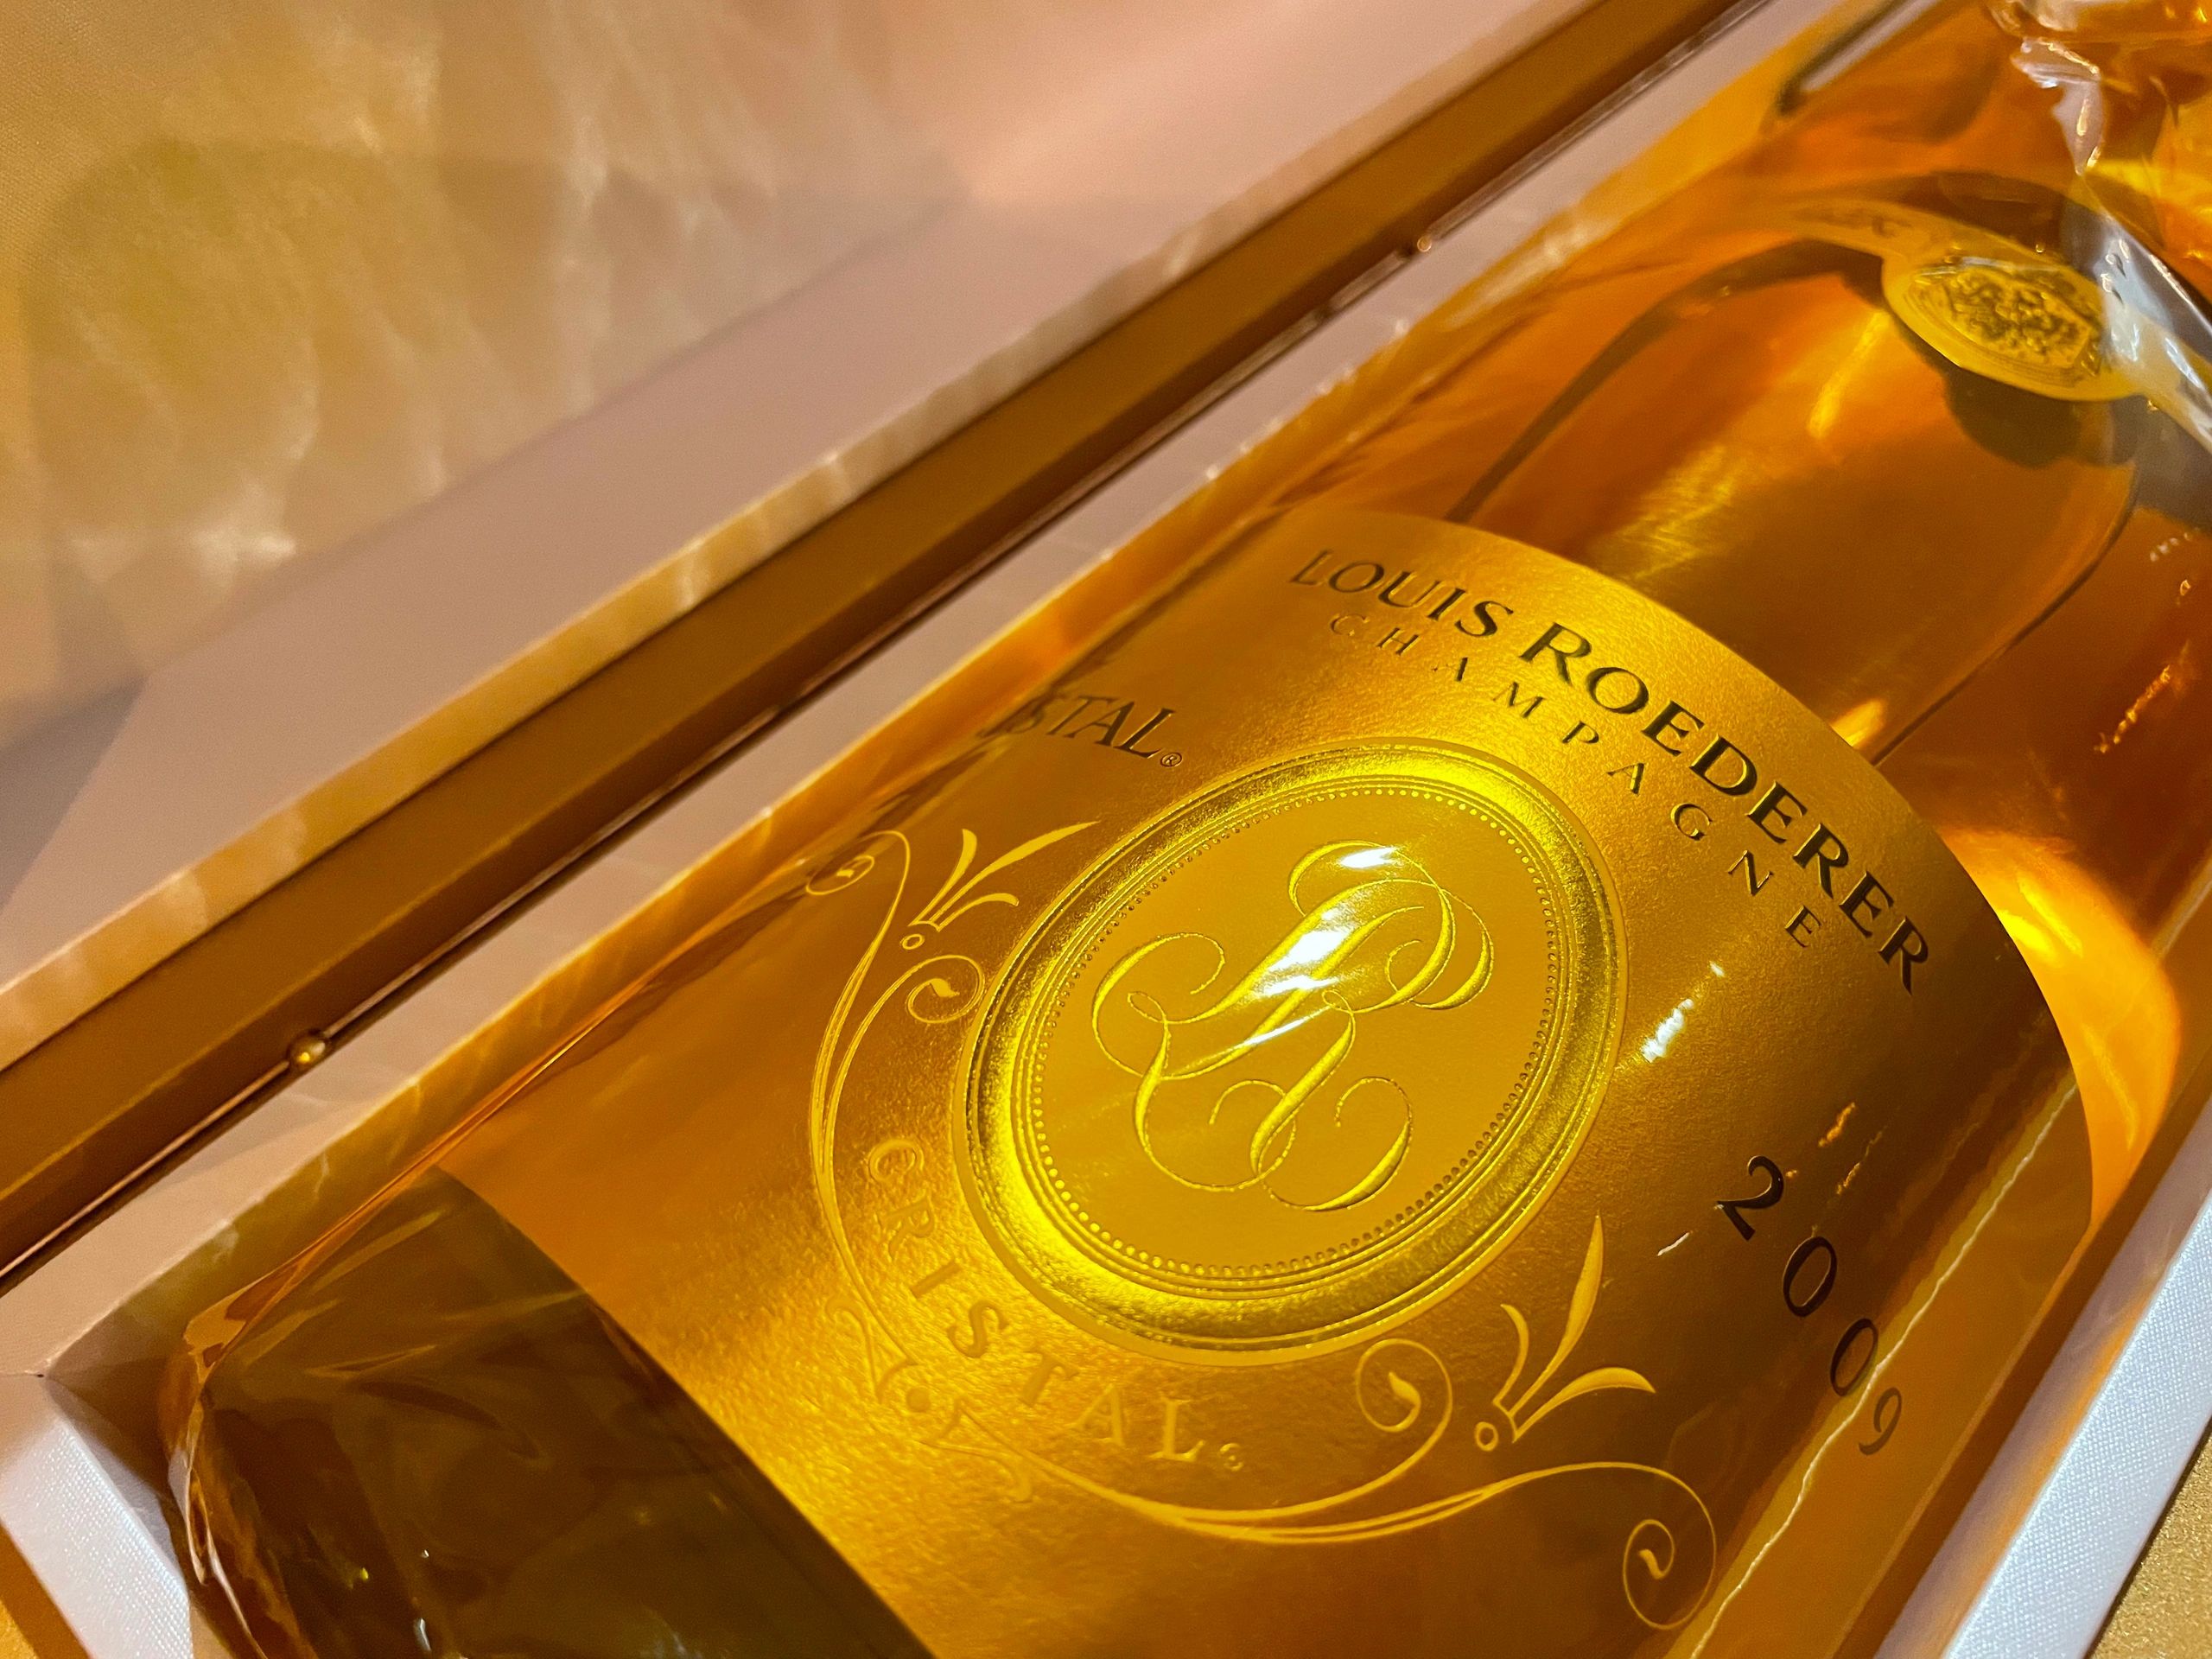 Cristal: The Champagne of a Tsar